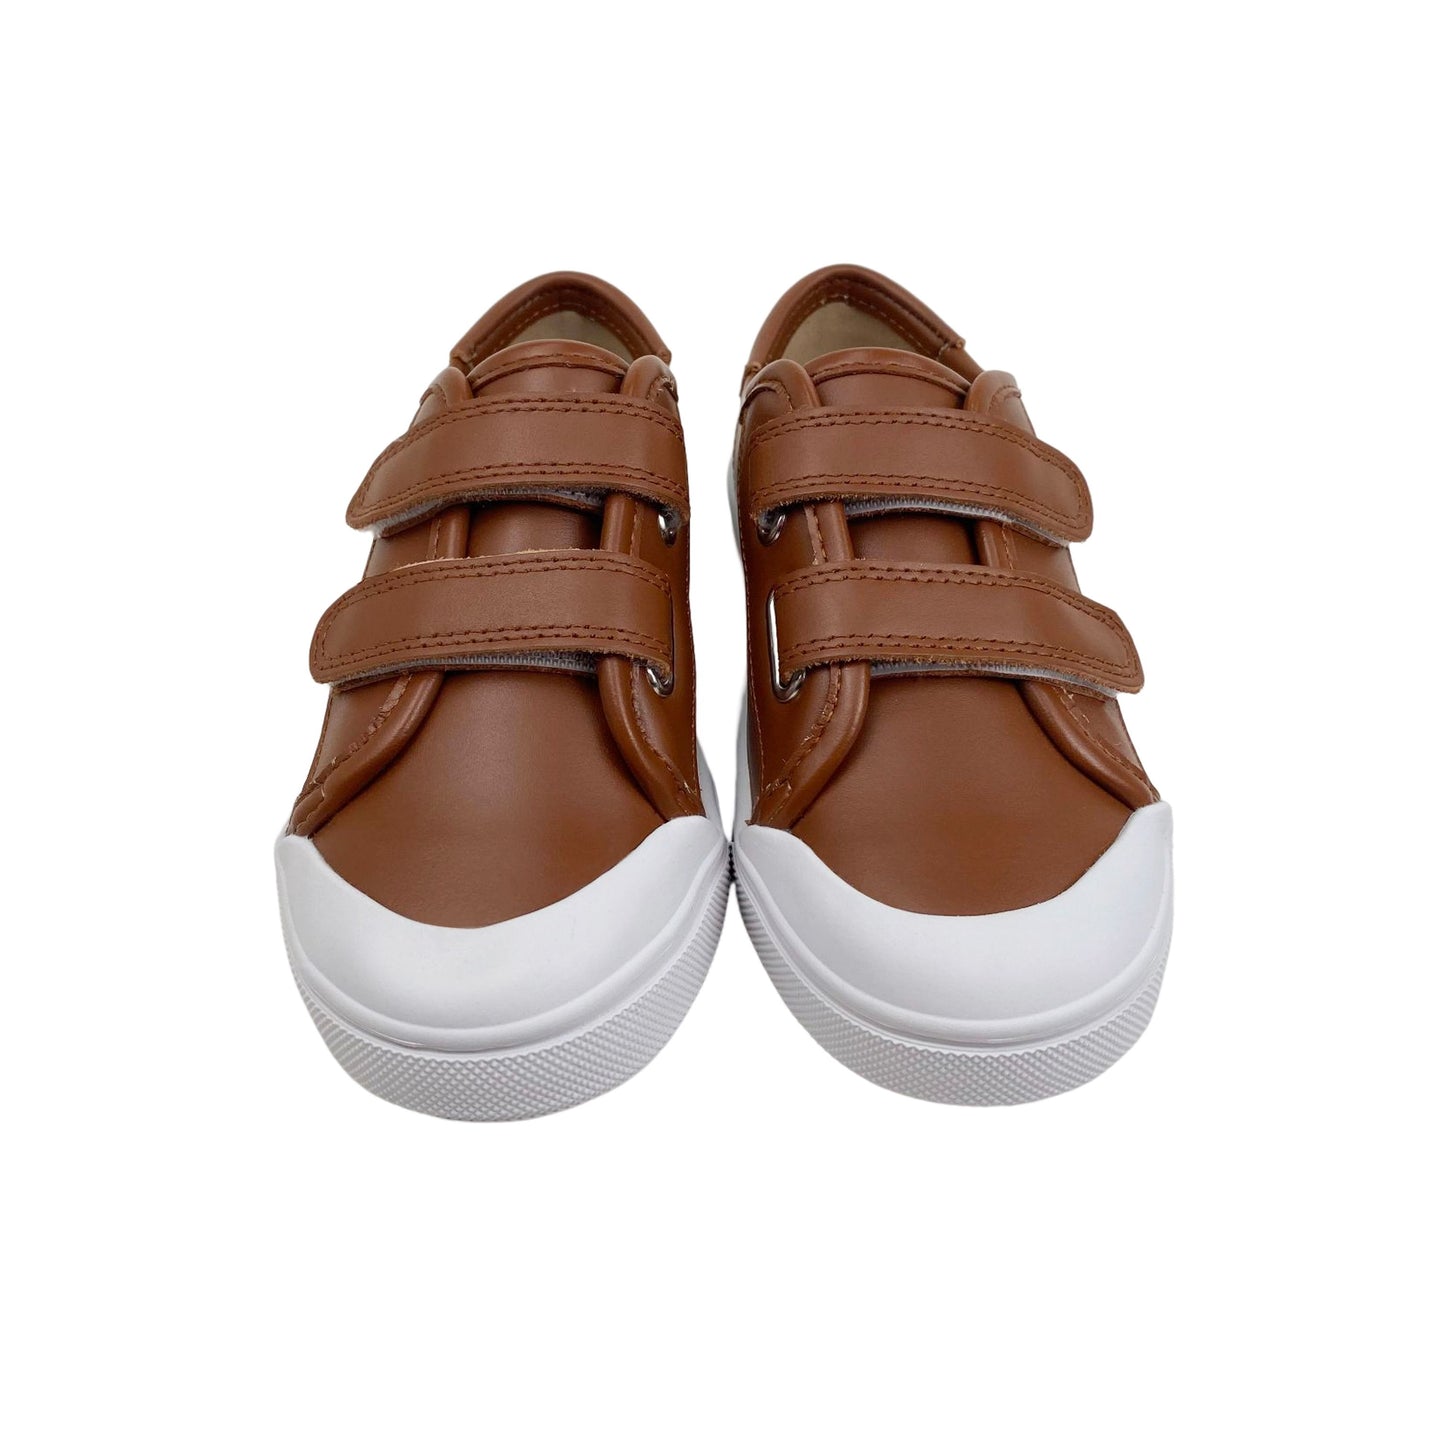 PERROQUET VELCRO LUGGAGE LEATHER SNEAKER